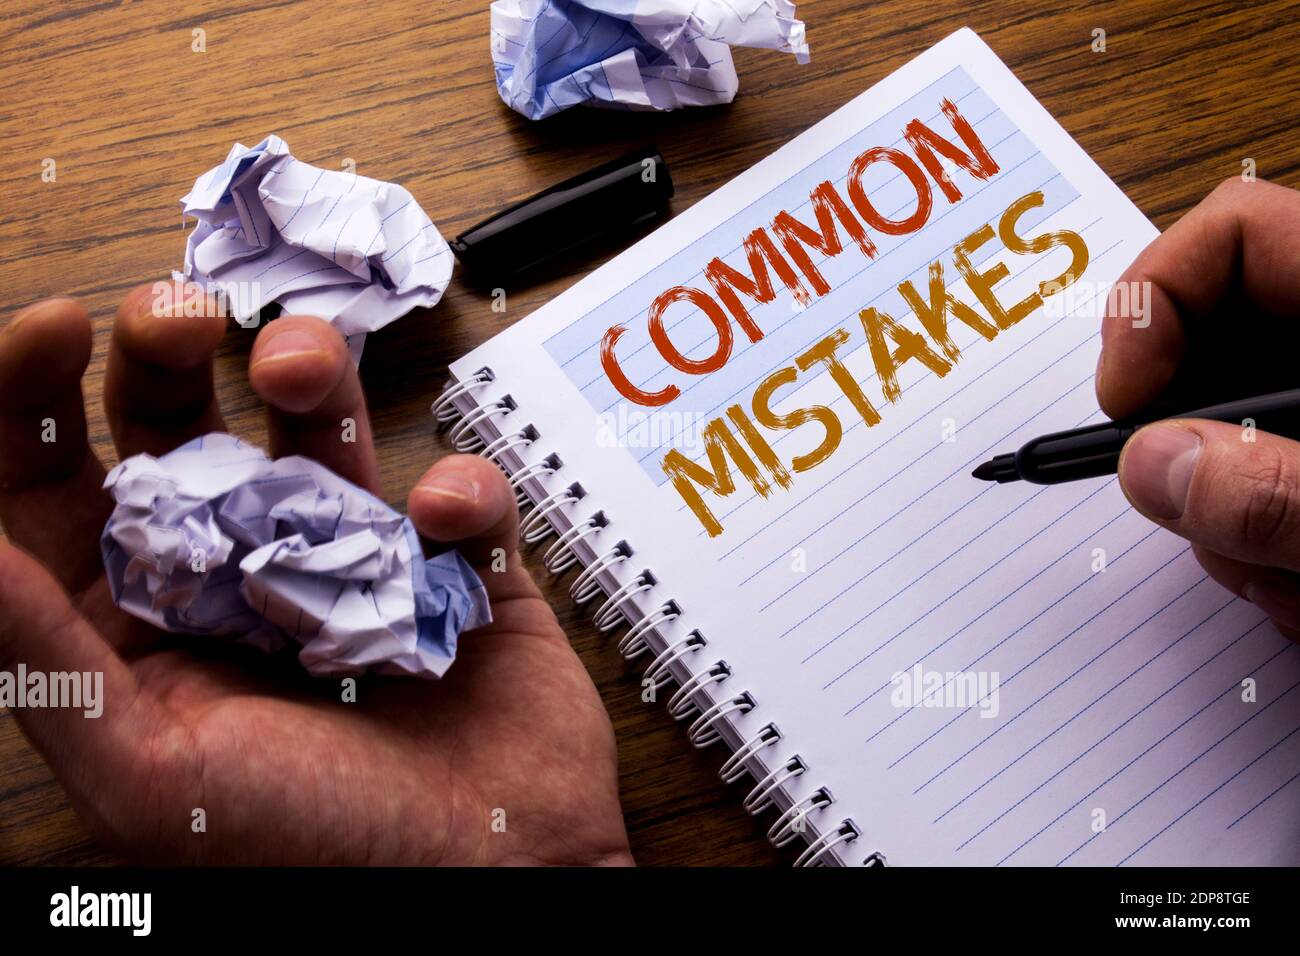 Cropped Hands With Common Mistakes Text On Spiral Notebook At Table Stock Photo